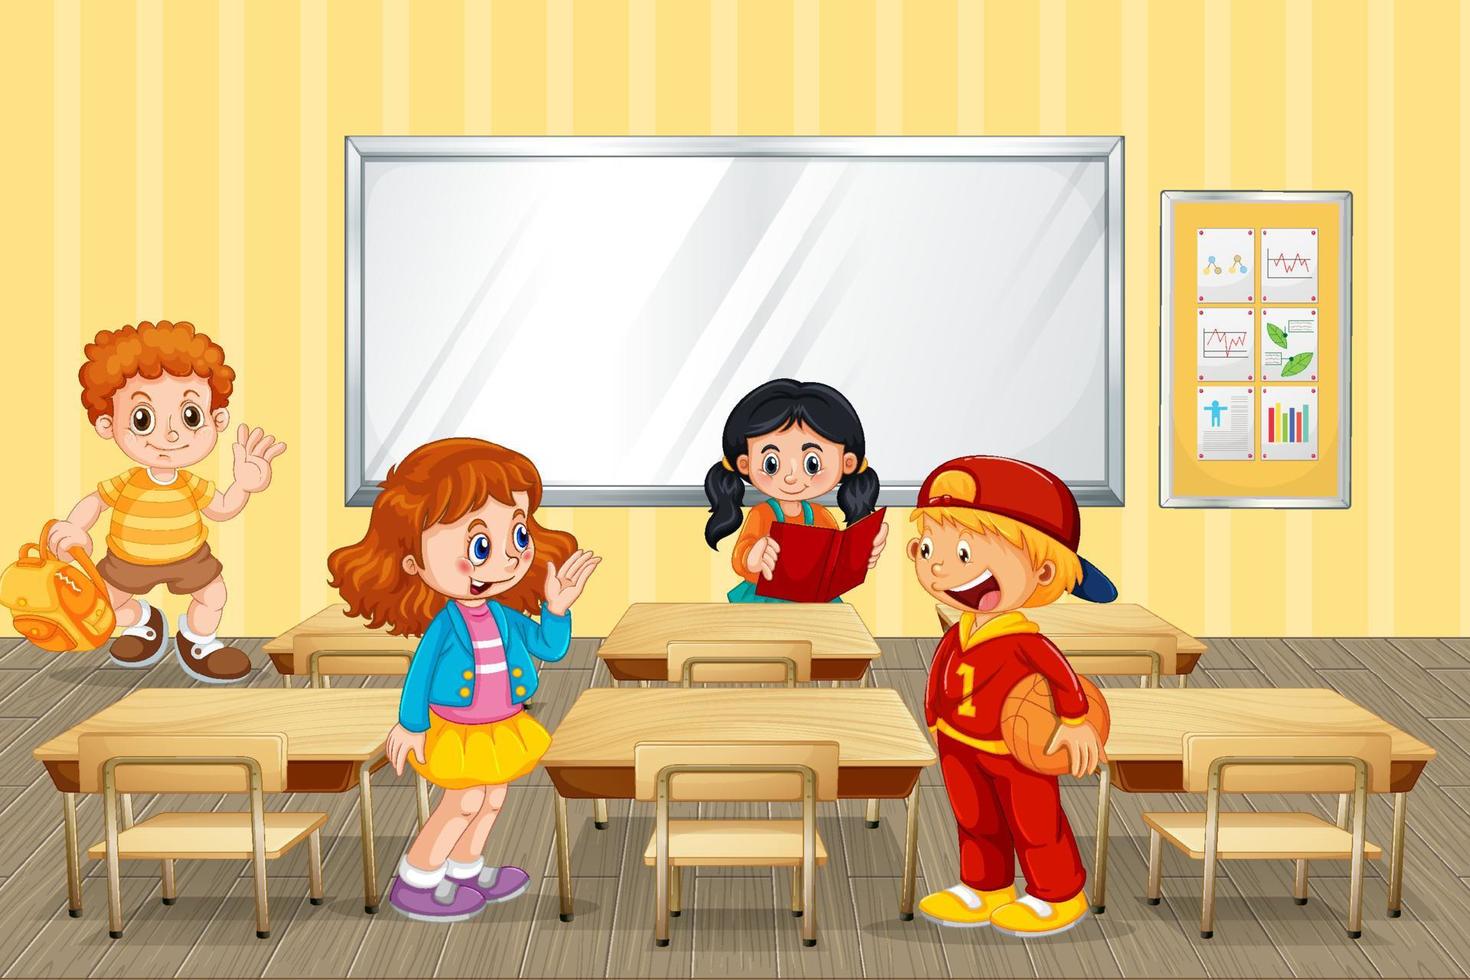 Students cartoon character ready to go back home after school time vector